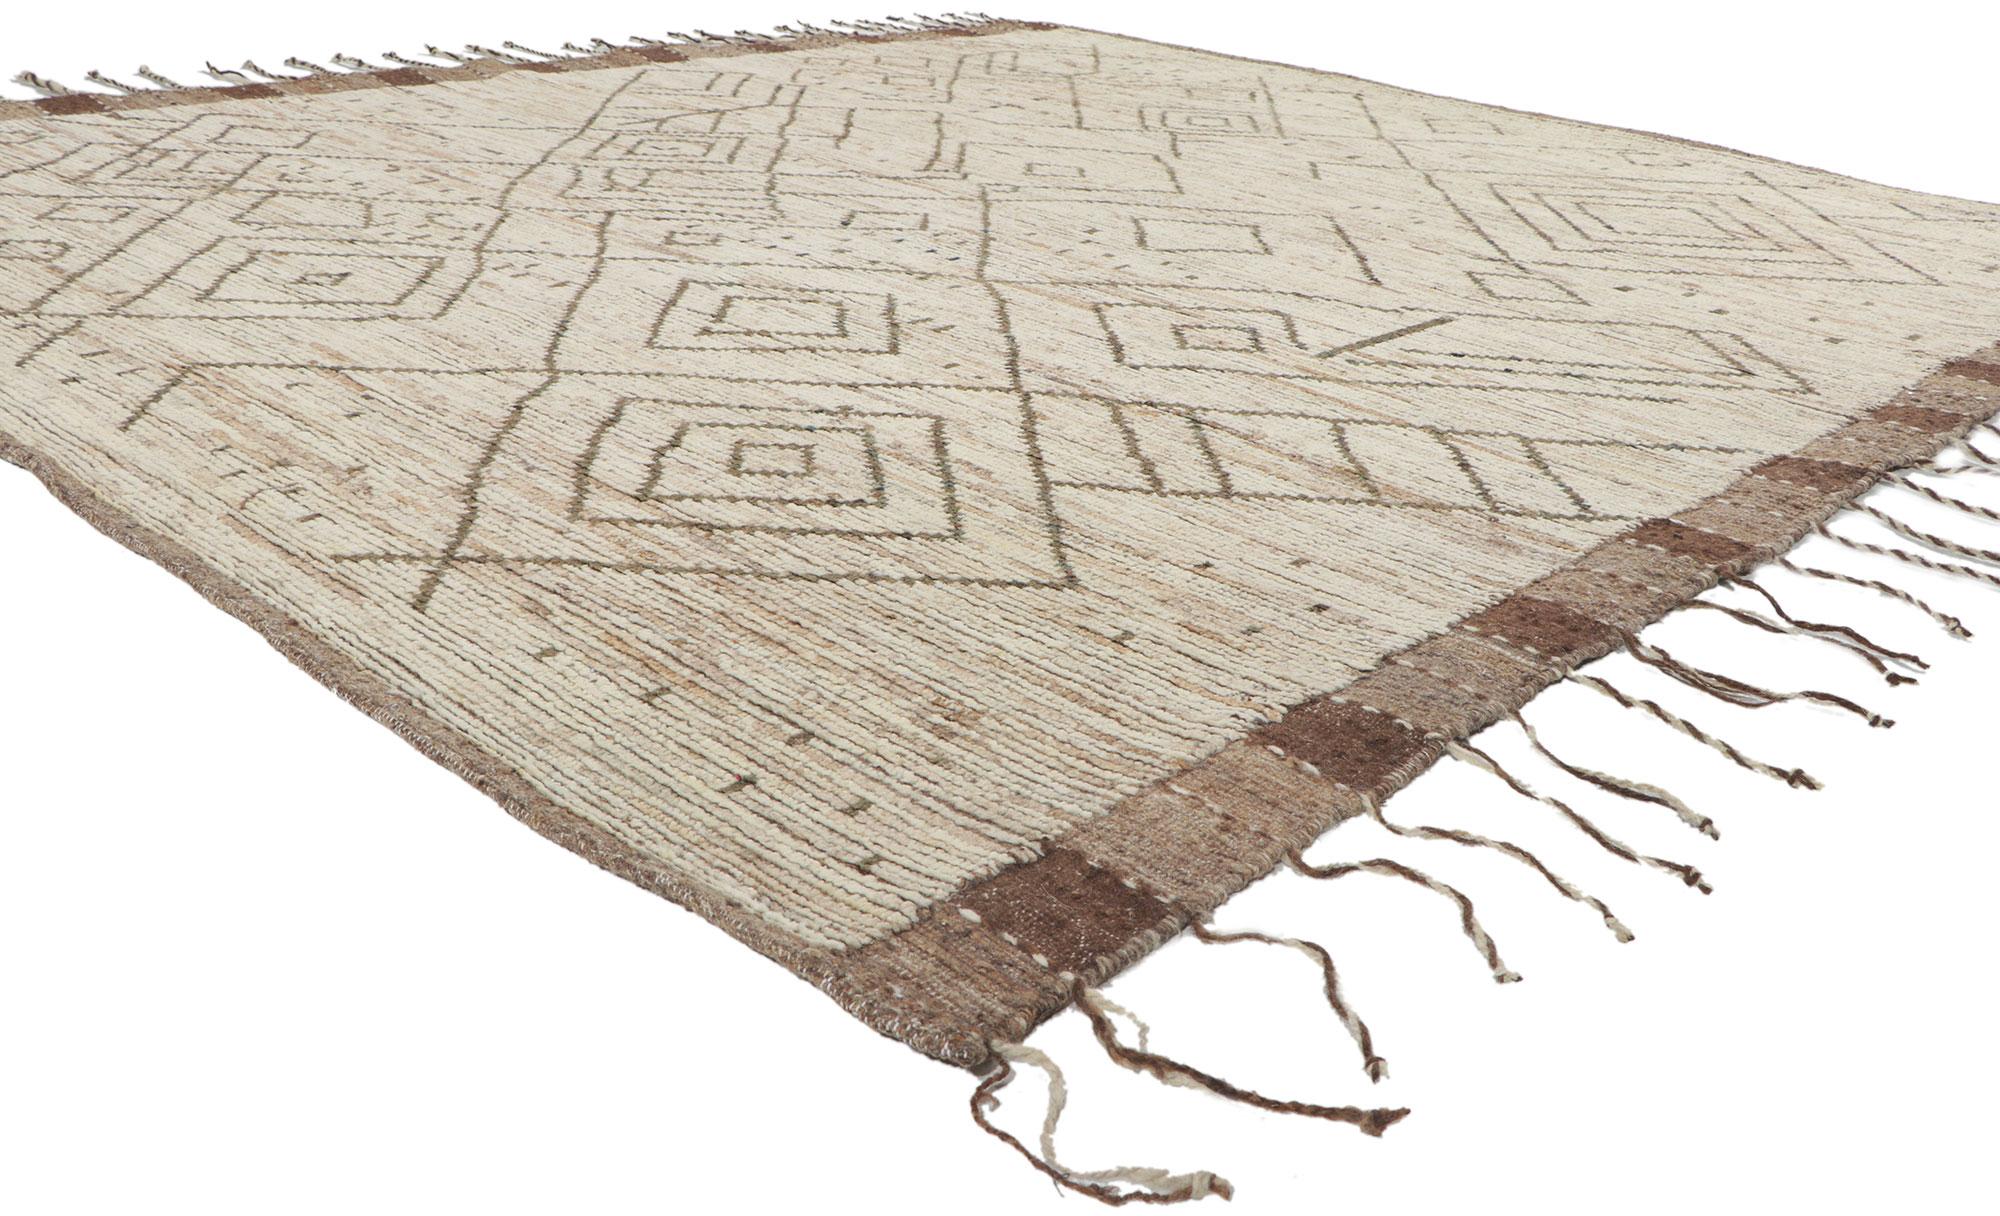 80795 New Contemporary Moroccan rug with Short Pile, 08'04 x 09'06. Showcasing an expressive design, incredible detail and texture, this hand knotted wool Moroccan style rug is a captivating vision of woven beauty. The eye-catching tribal pattern